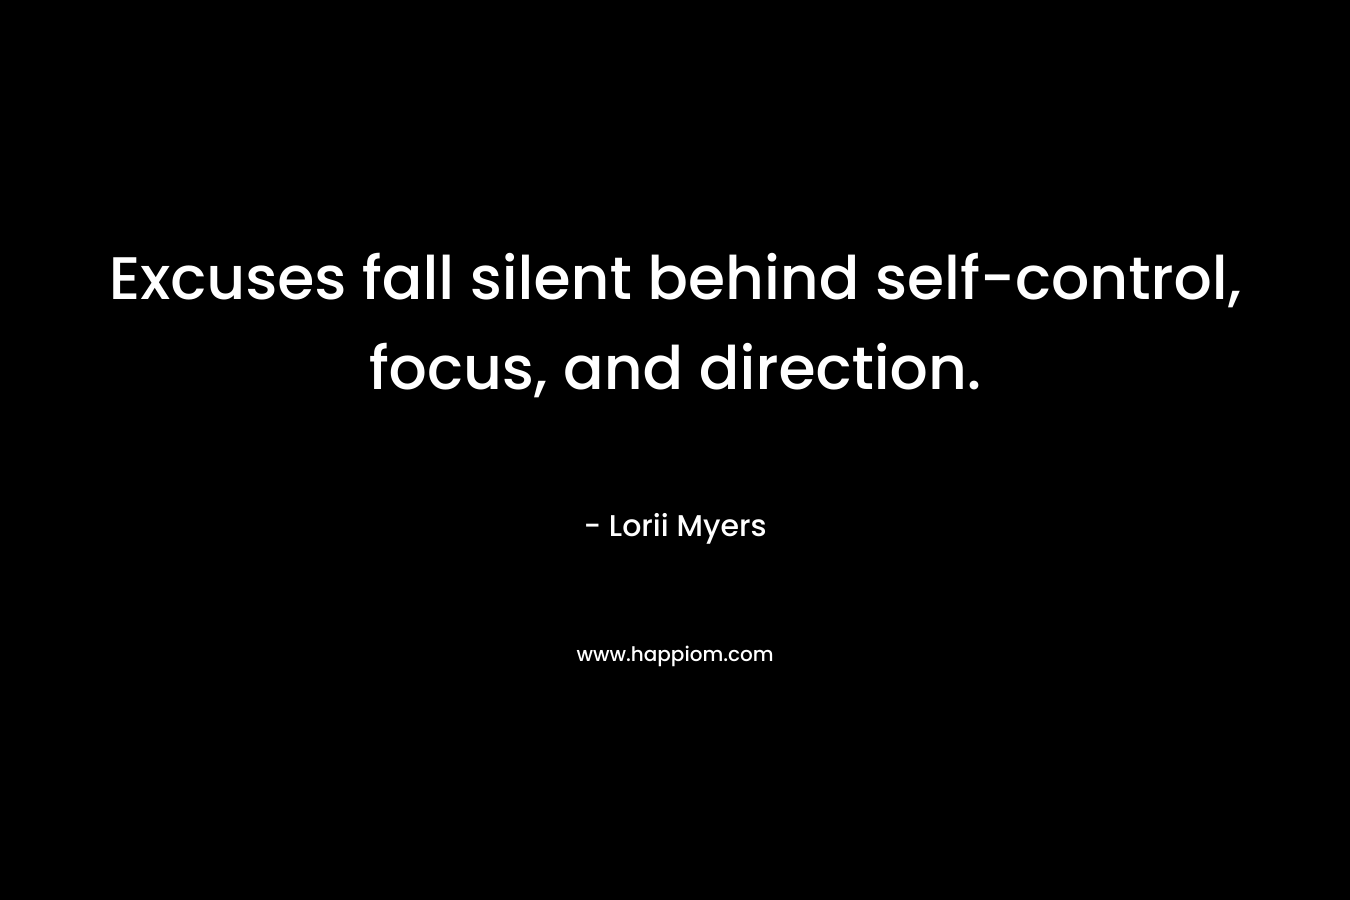 Excuses fall silent behind self-control, focus, and direction.